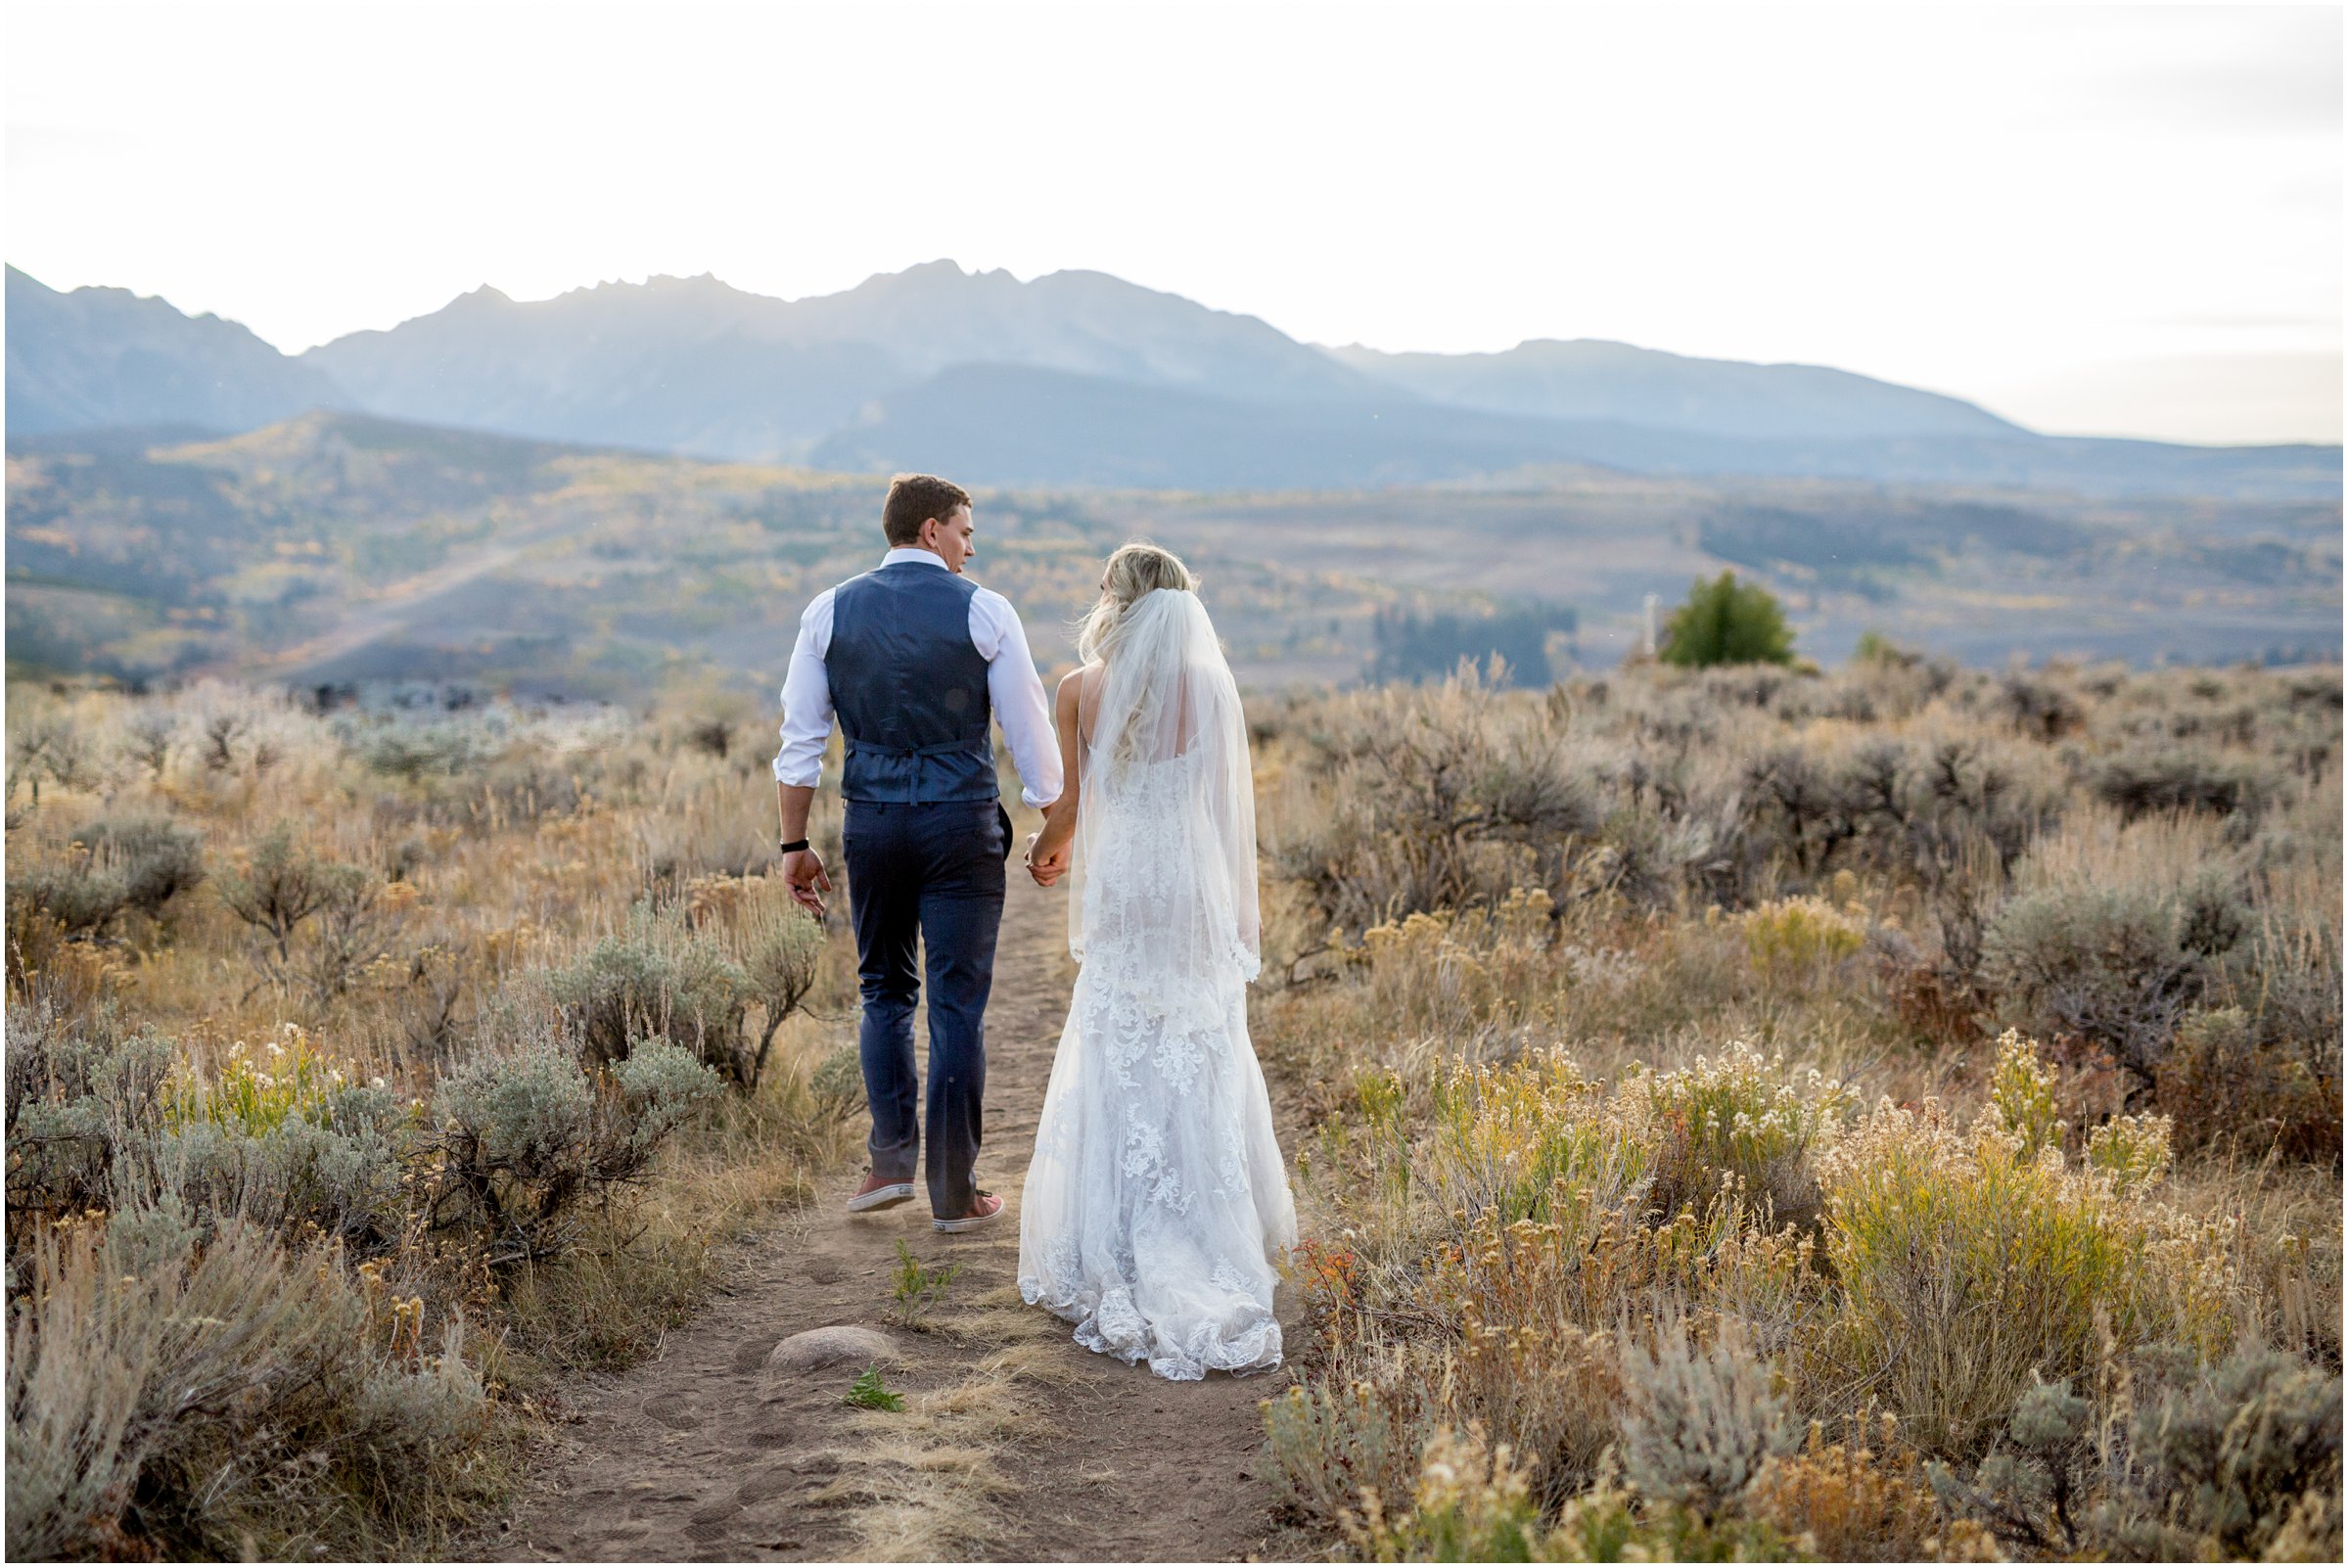 bride and groom walk down a path together toward a mountain range holding hands